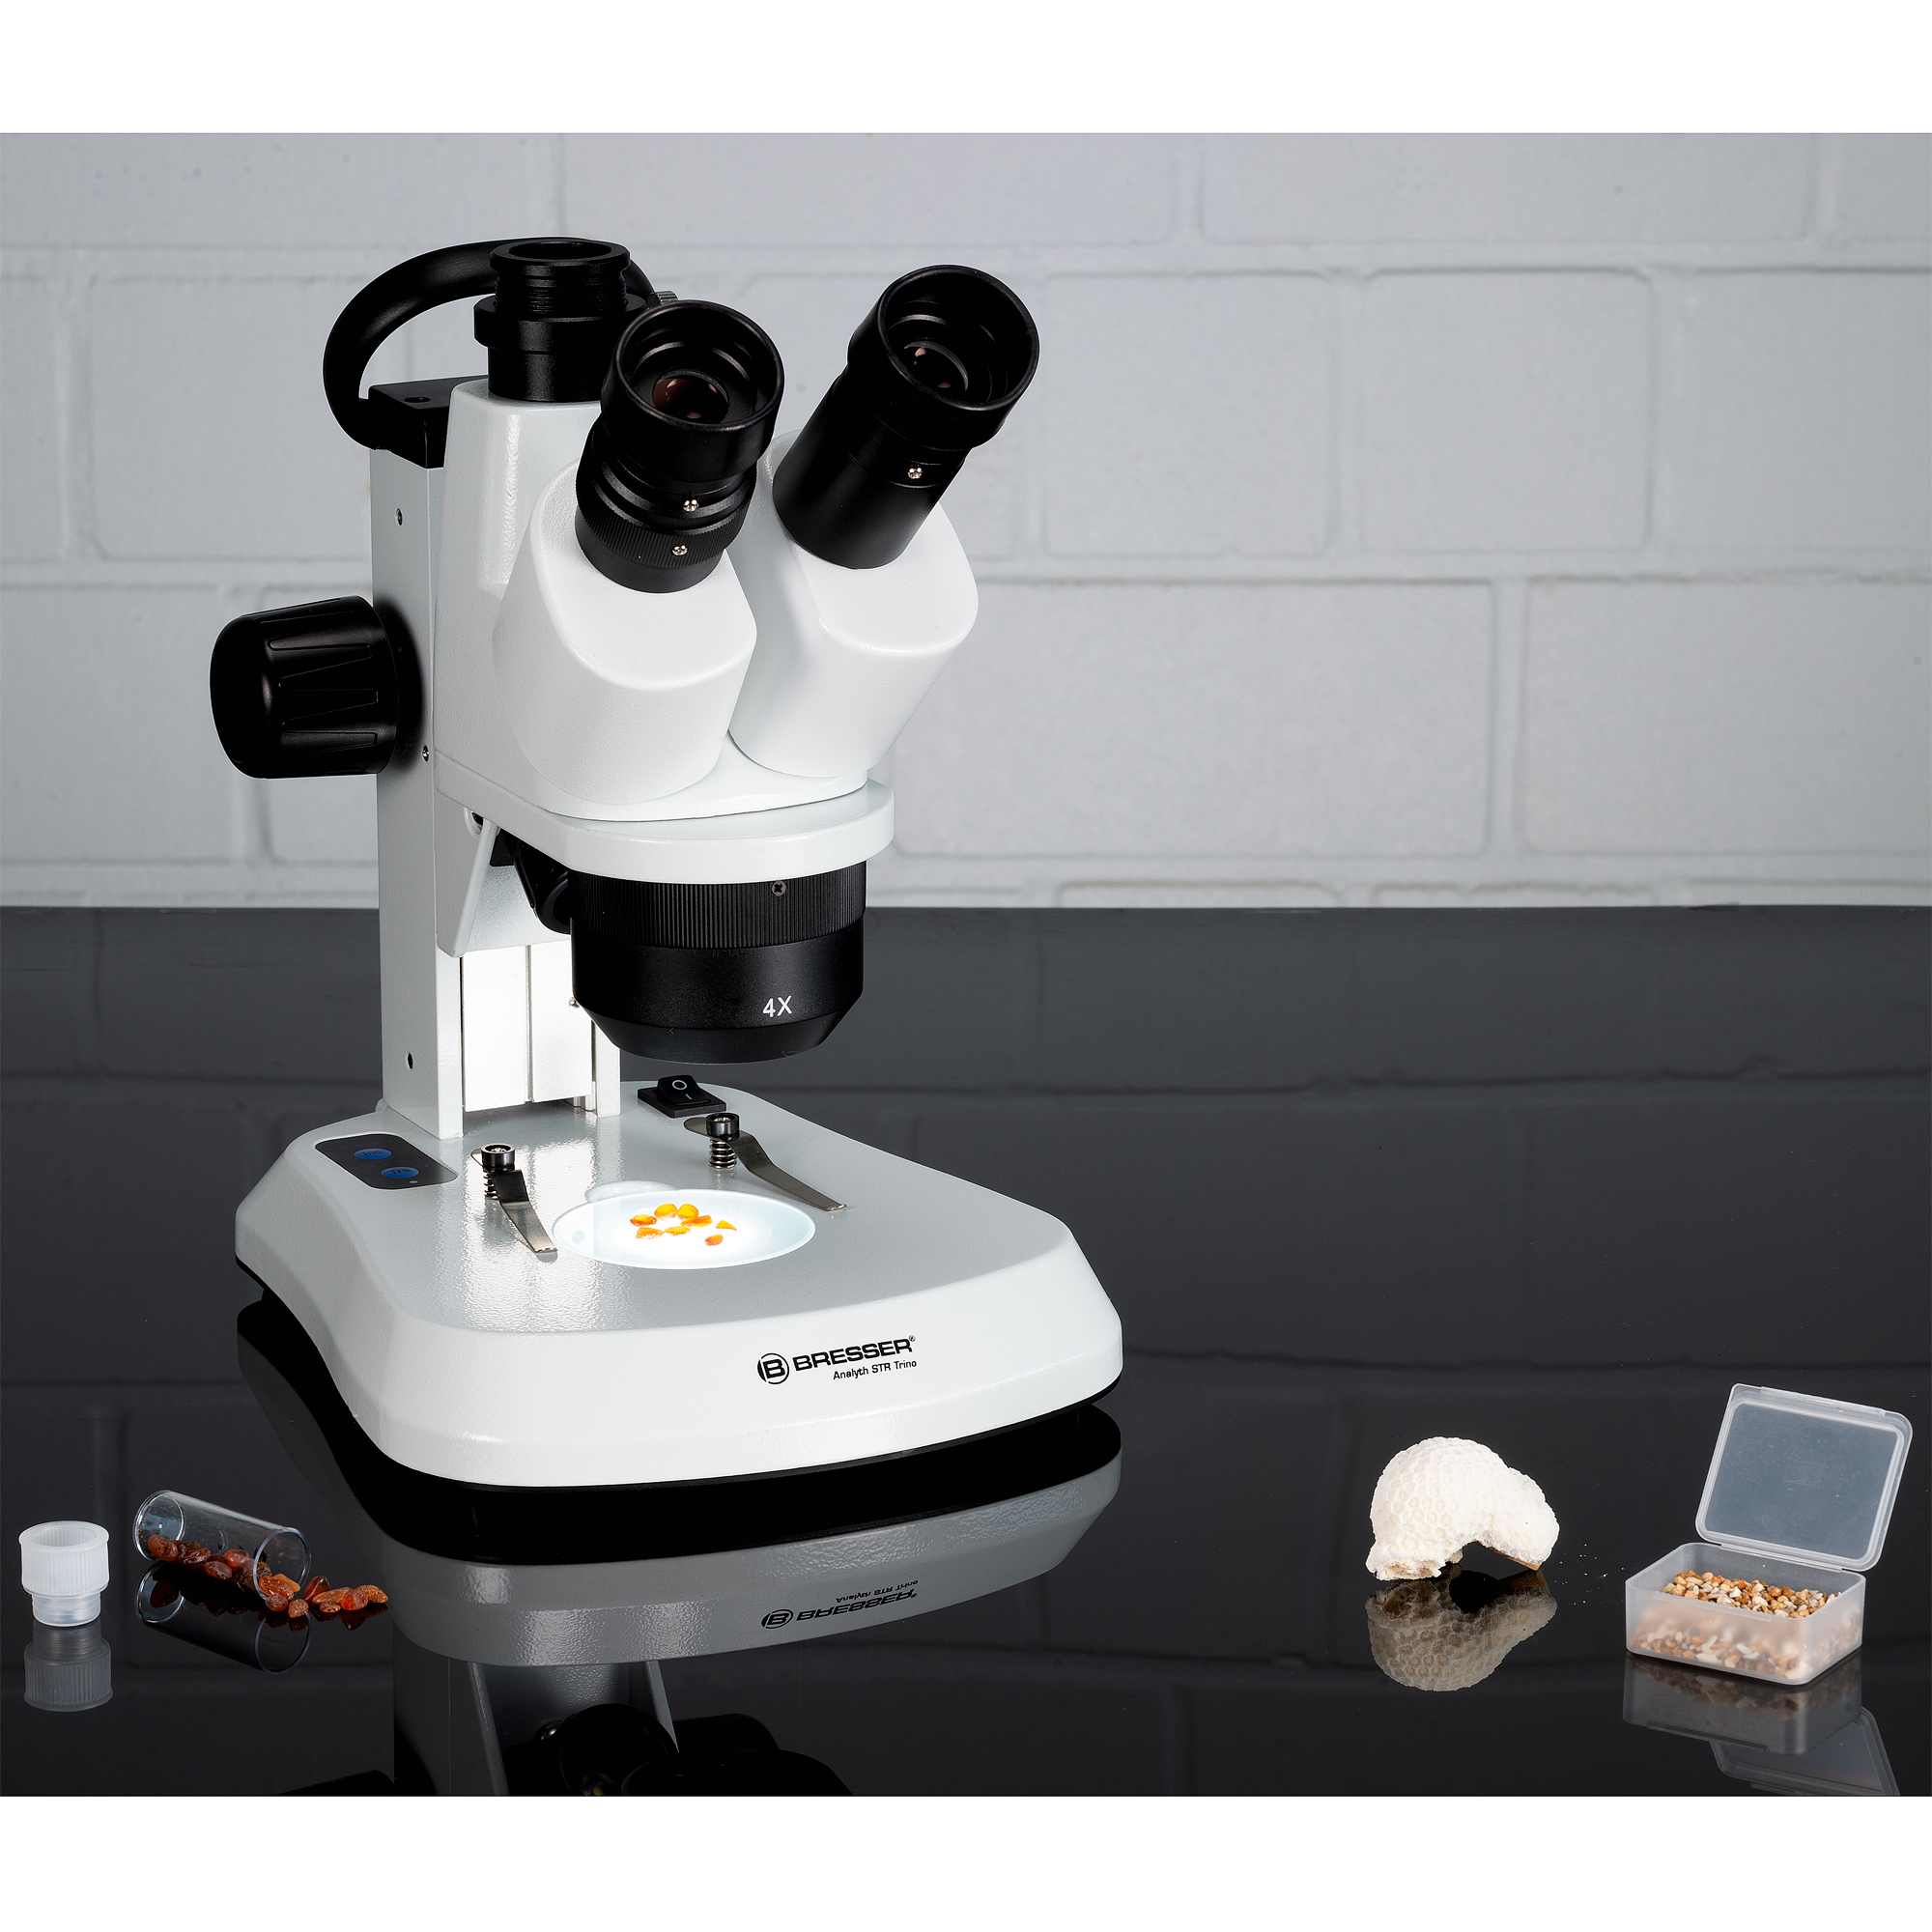 BRESSER Analyth STR Trino 10x - 40x trinoculary stereo microscope with incident- and transmitted light